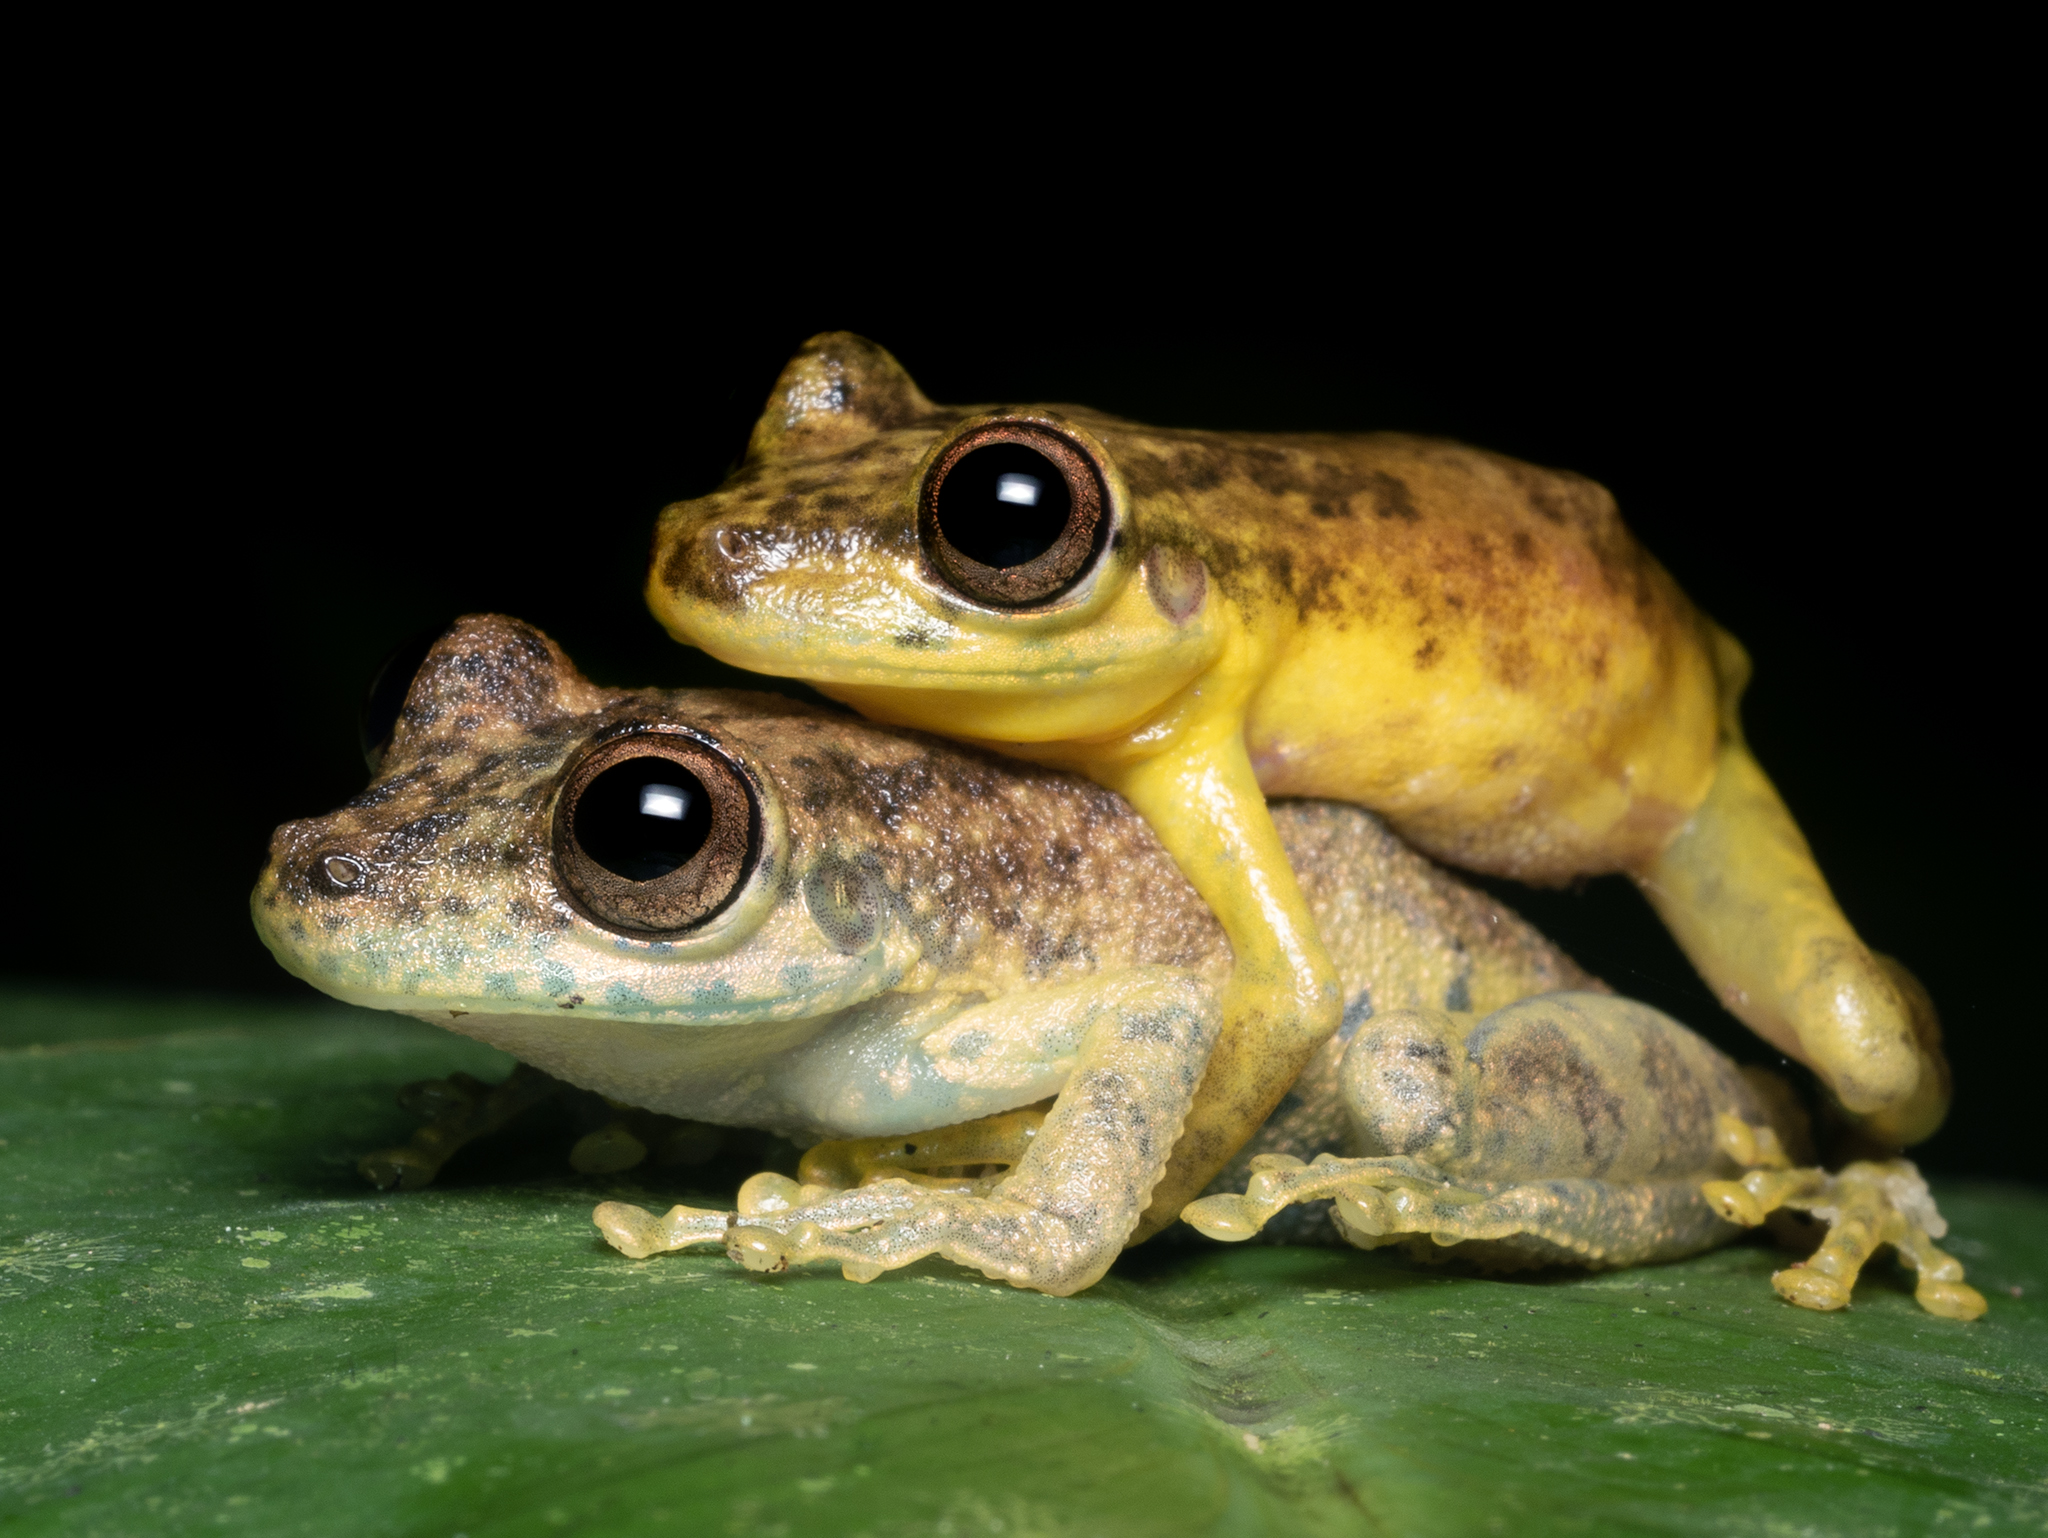 You are currently viewing Mating Snouted Tree Frogs